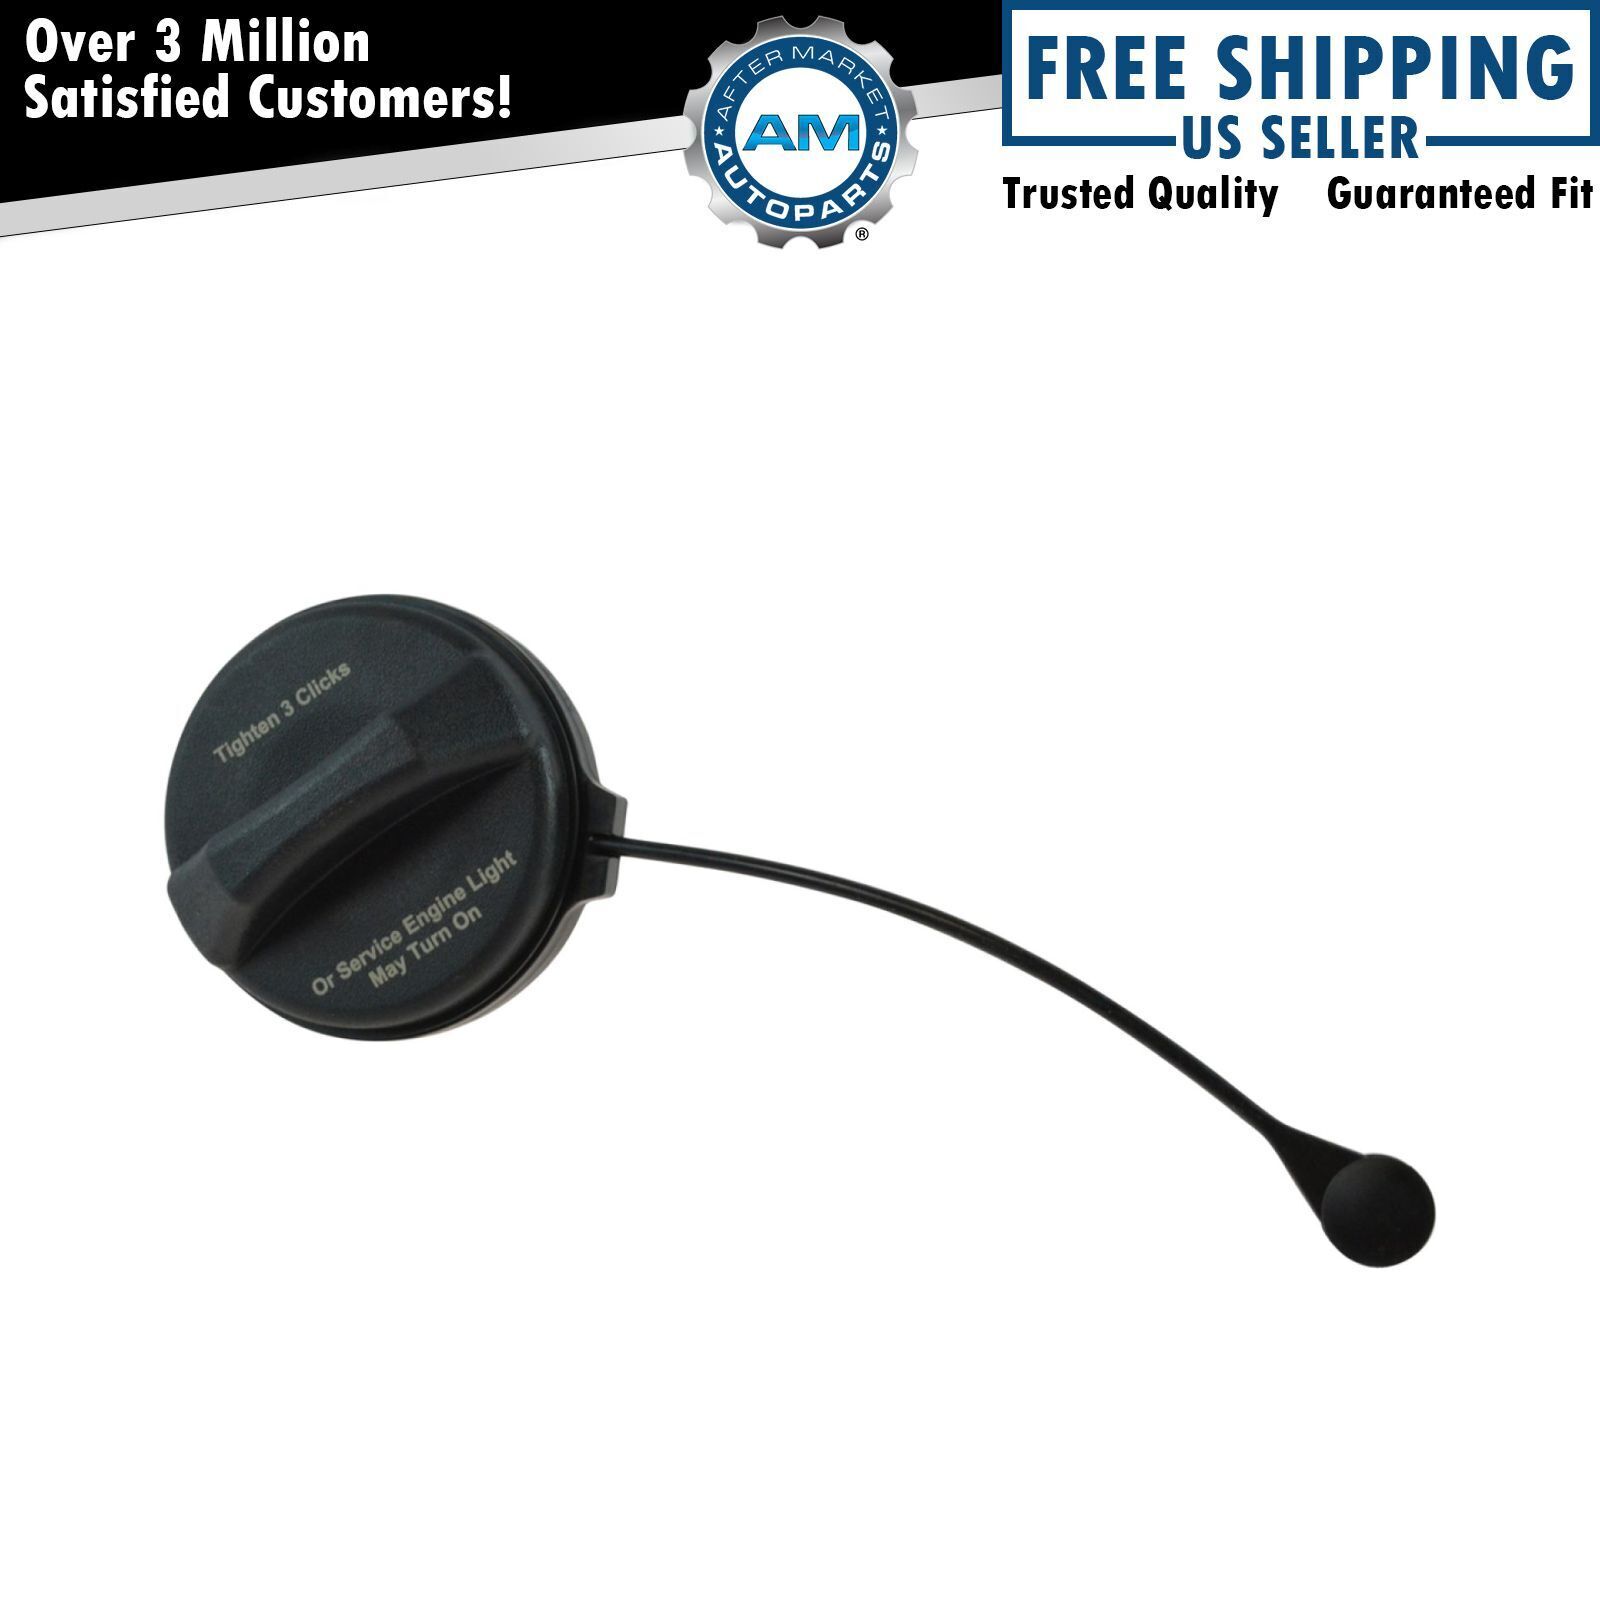 OEM 95995094 Fuel Tank Gas Cap with Tether for Chevy GMC Buick Pontiac New